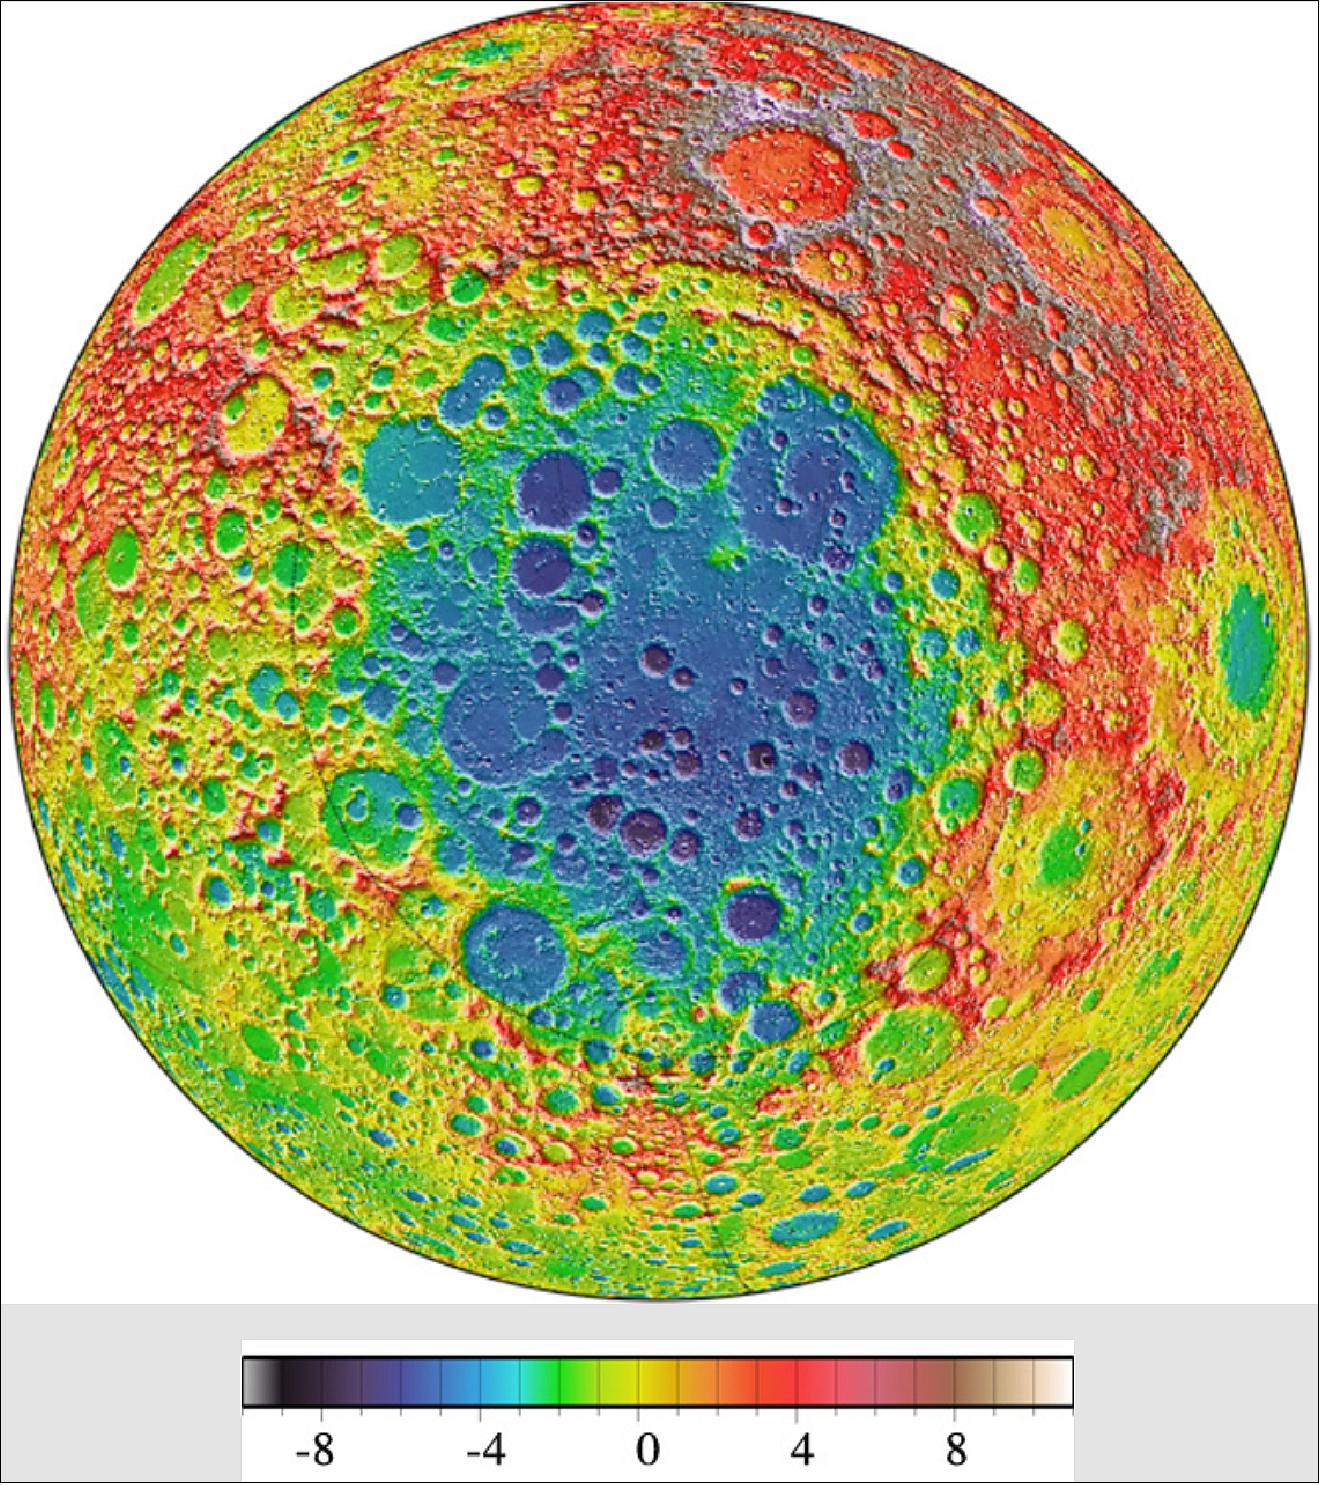 Figure 1: Elevation diagram of the South-Pole Aitken Basin (scale in km). This LOLA (Lunar Orbiter Laser Altimeter) image on NASA's LRO (Lunar Reconnaissance Orbiter) mission centers on the SPA (South Pole-Aitken) basin, the largest impact basin on the Moon (diameter = 2600 km), and one of the largest impact basins in the Solar System. The distance from its depths to the tops of the highest surrounding peaks is over 15 km, almost twice the height of Mount Everest on Earth. SPA is interesting for a number of reasons. To begin with, large impact events can remove surficial materials from local areas and bring material from beneath the impact craters to, or closer to, the surface. The larger the crater, the deeper the material that can be exposed. As SPA is the deepest impact basin on the Moon, more than 8 km deep, the deepest lunar crustal materials should be exposed here. In fact, the Moon's lower crust may be revealed in areas within SPA: something not found anywhere else on the Moon (image credit: NASA/GSFC)